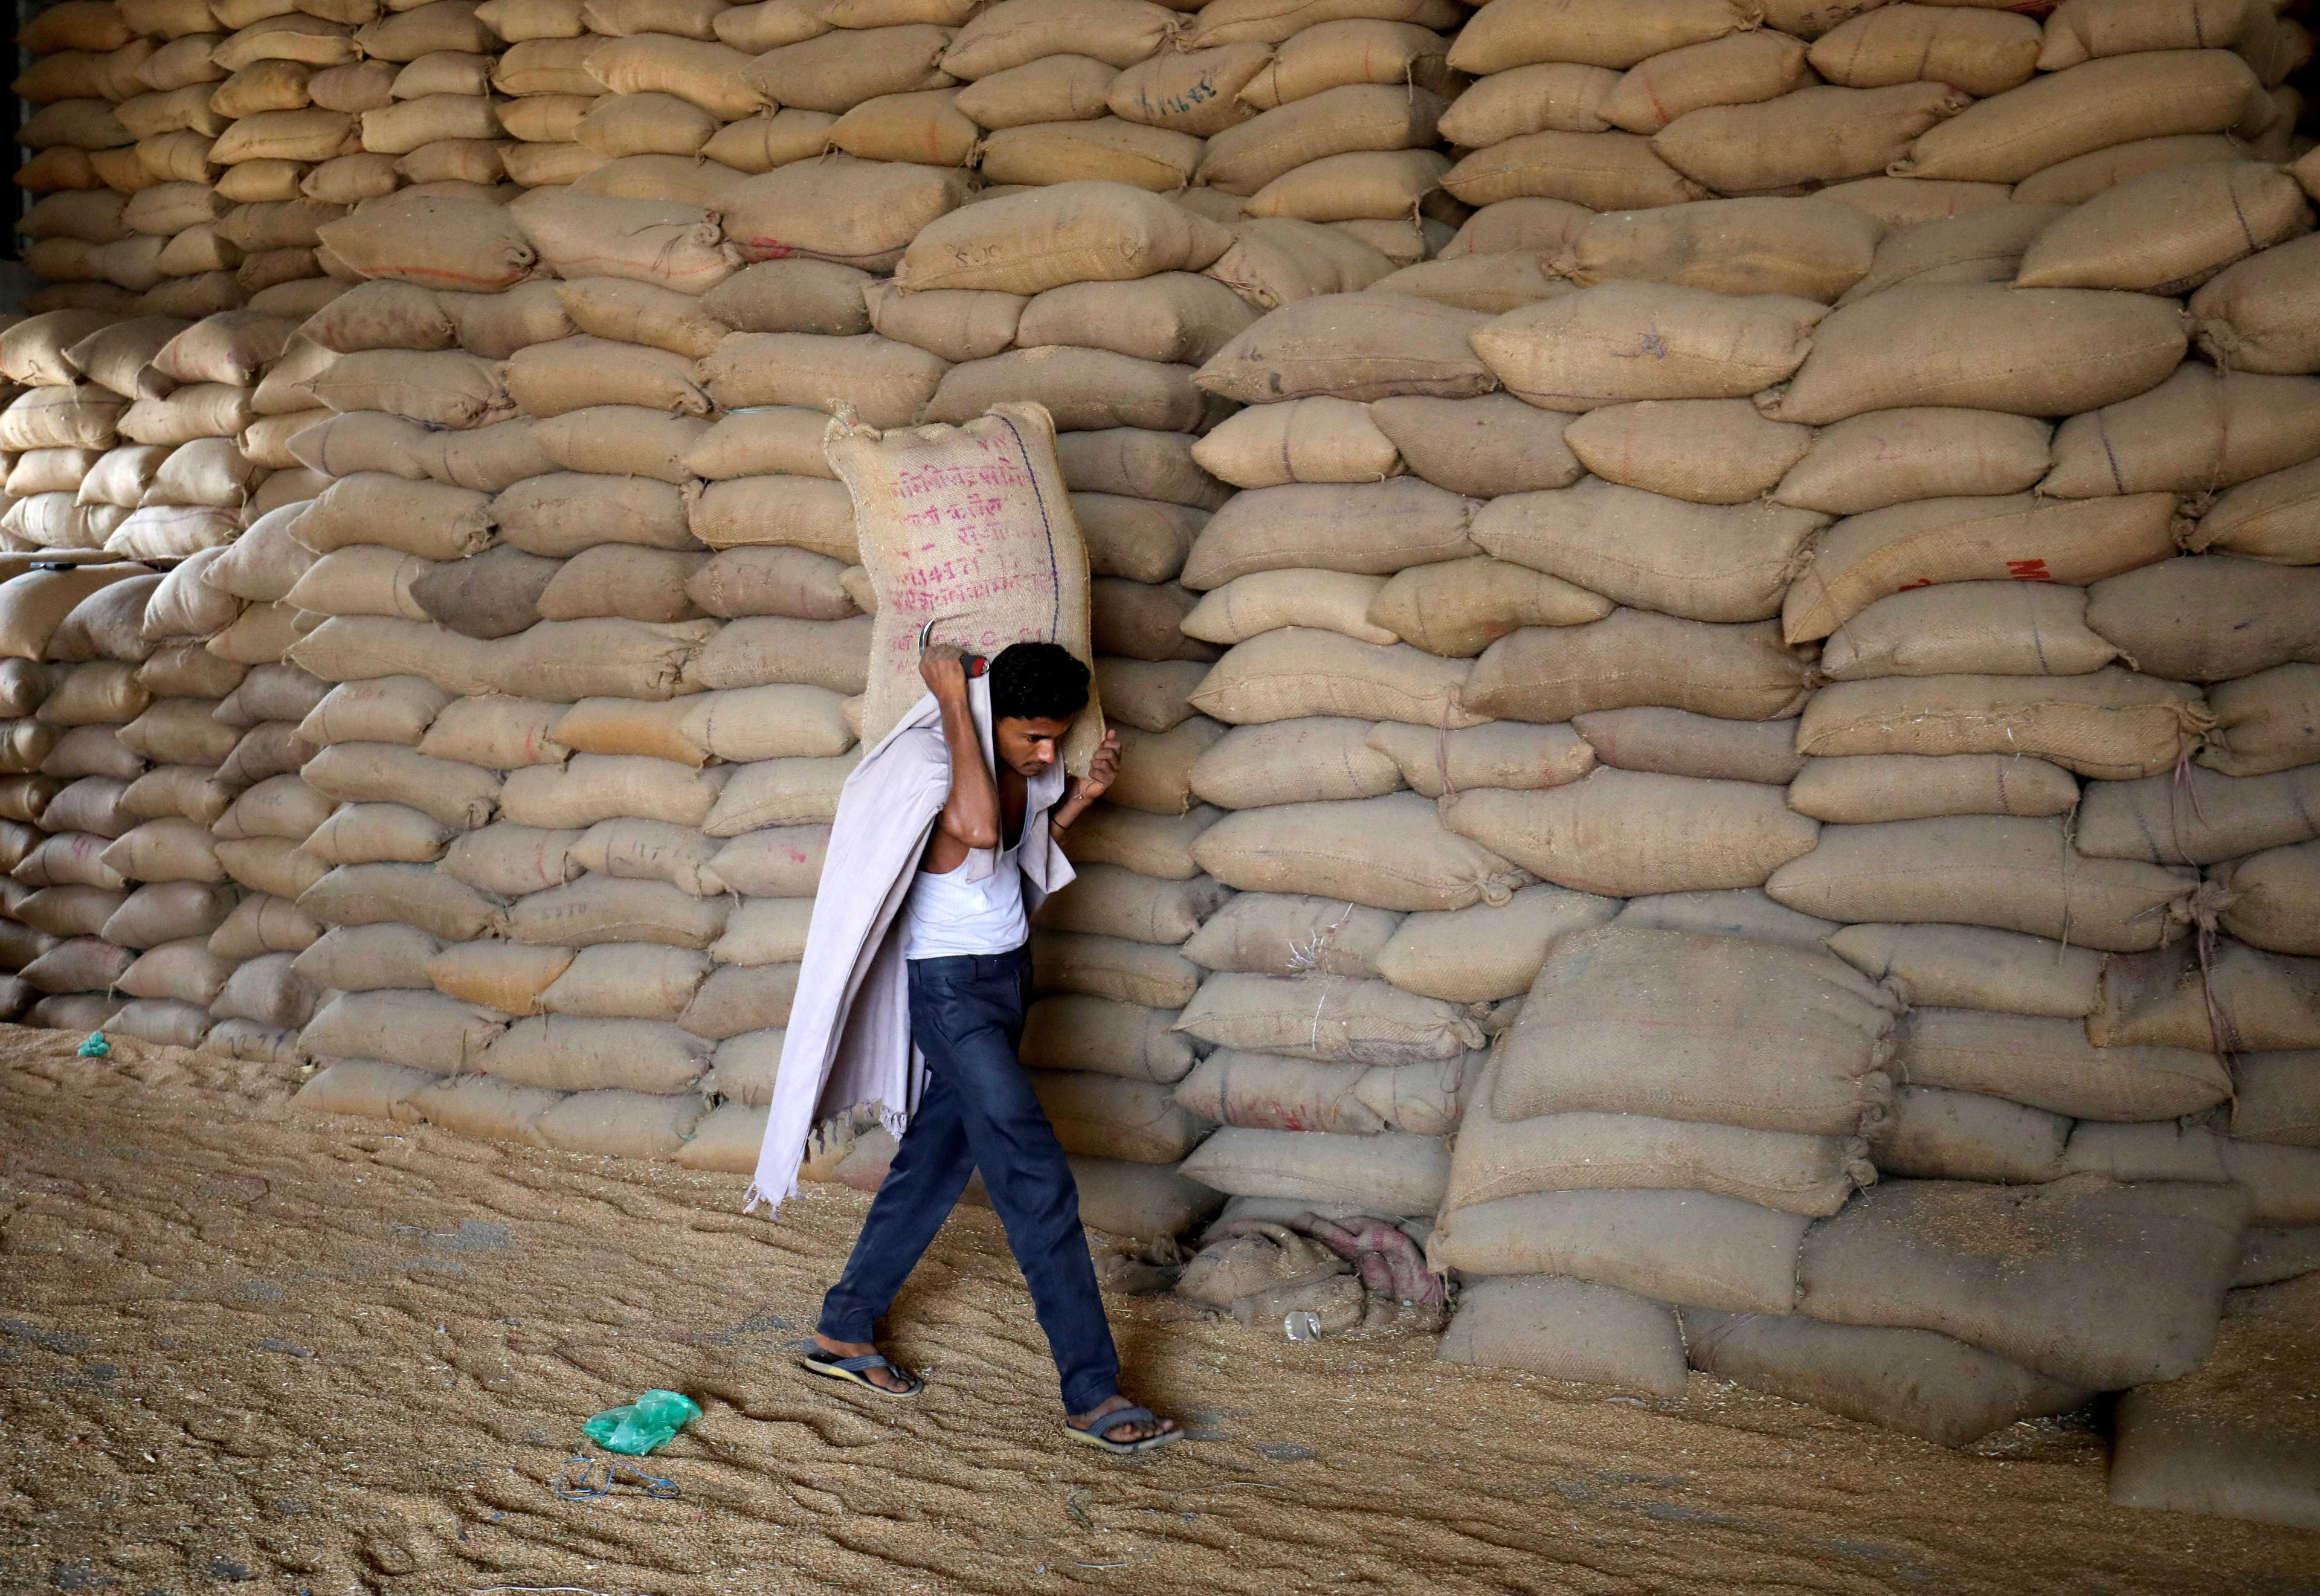 A worker carries a sack of wheat for sifting at a grain mill on the outskirts of Ahmedabad, India, May 16. Photo: Reuters